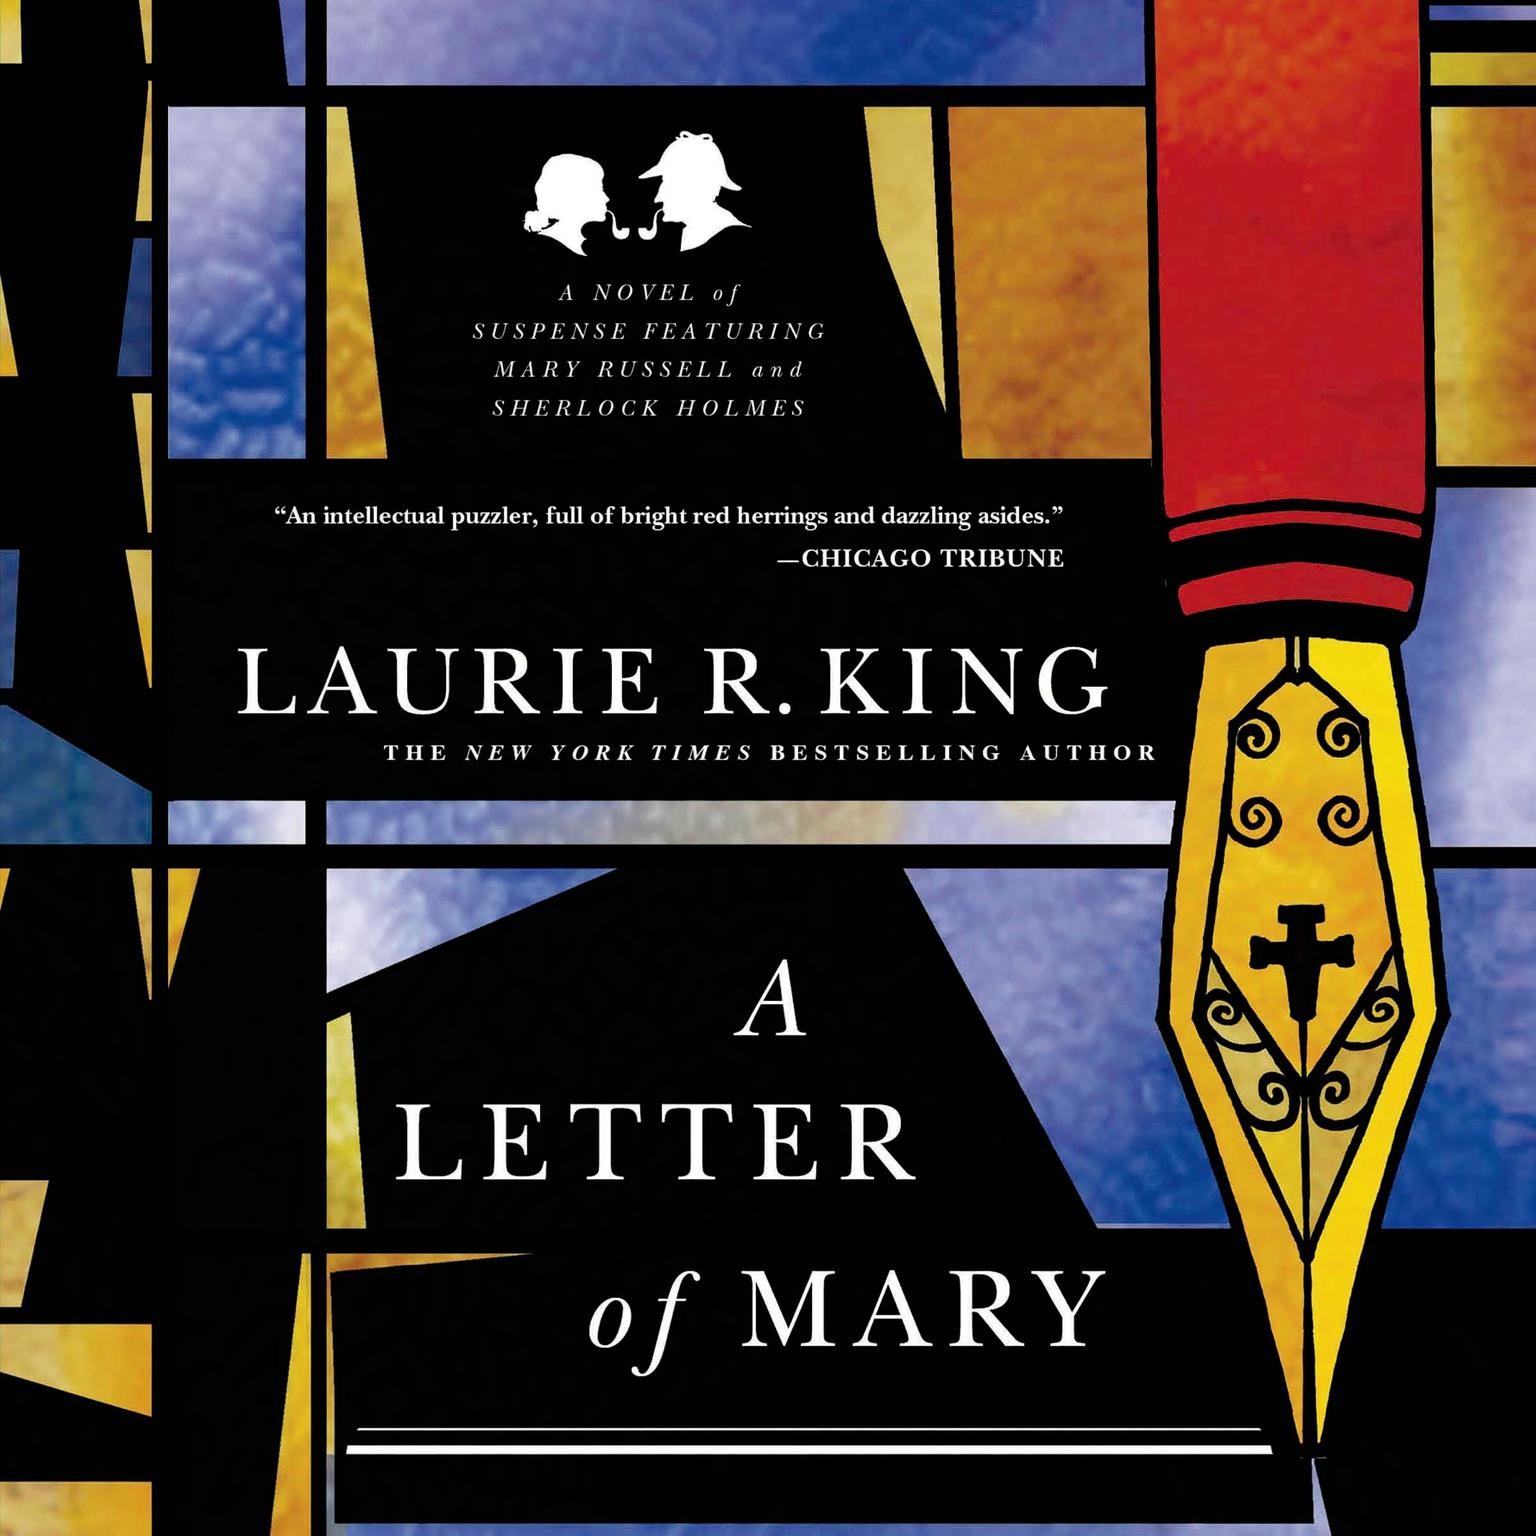 A Letter of Mary: A Novel of Suspense Featuring Mary Russell and Sherlock Holmes Audiobook, by Laurie R. King